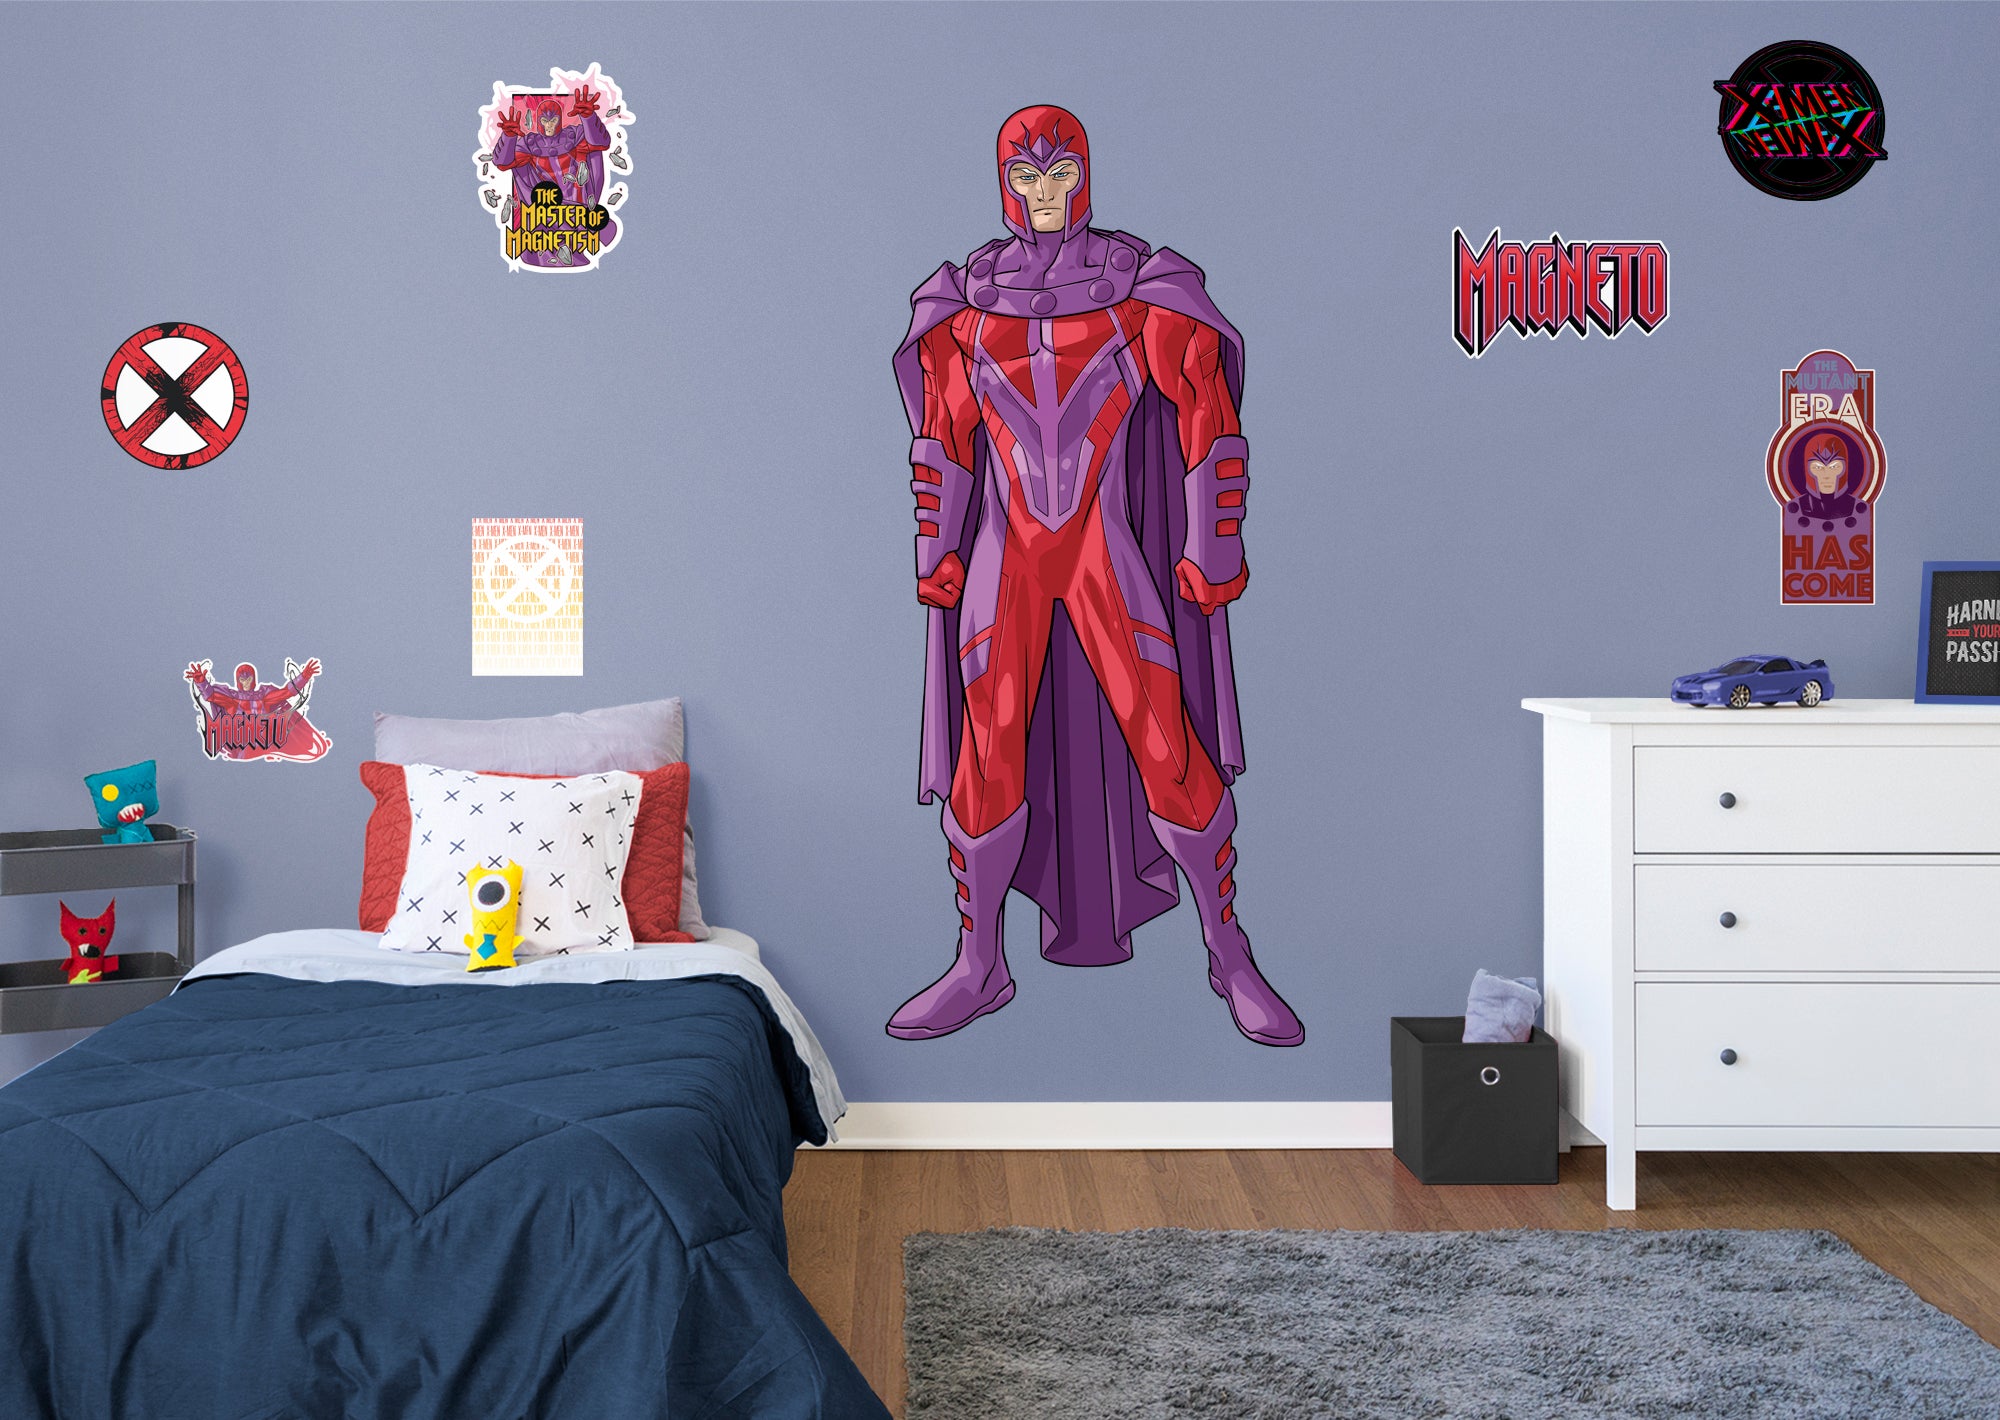 X-Men Magneto RealBig - Officially Licensed Marvel Removable Wall Decal Life-Size Character + 7 Decals (35"W x 78"H) by Fathead